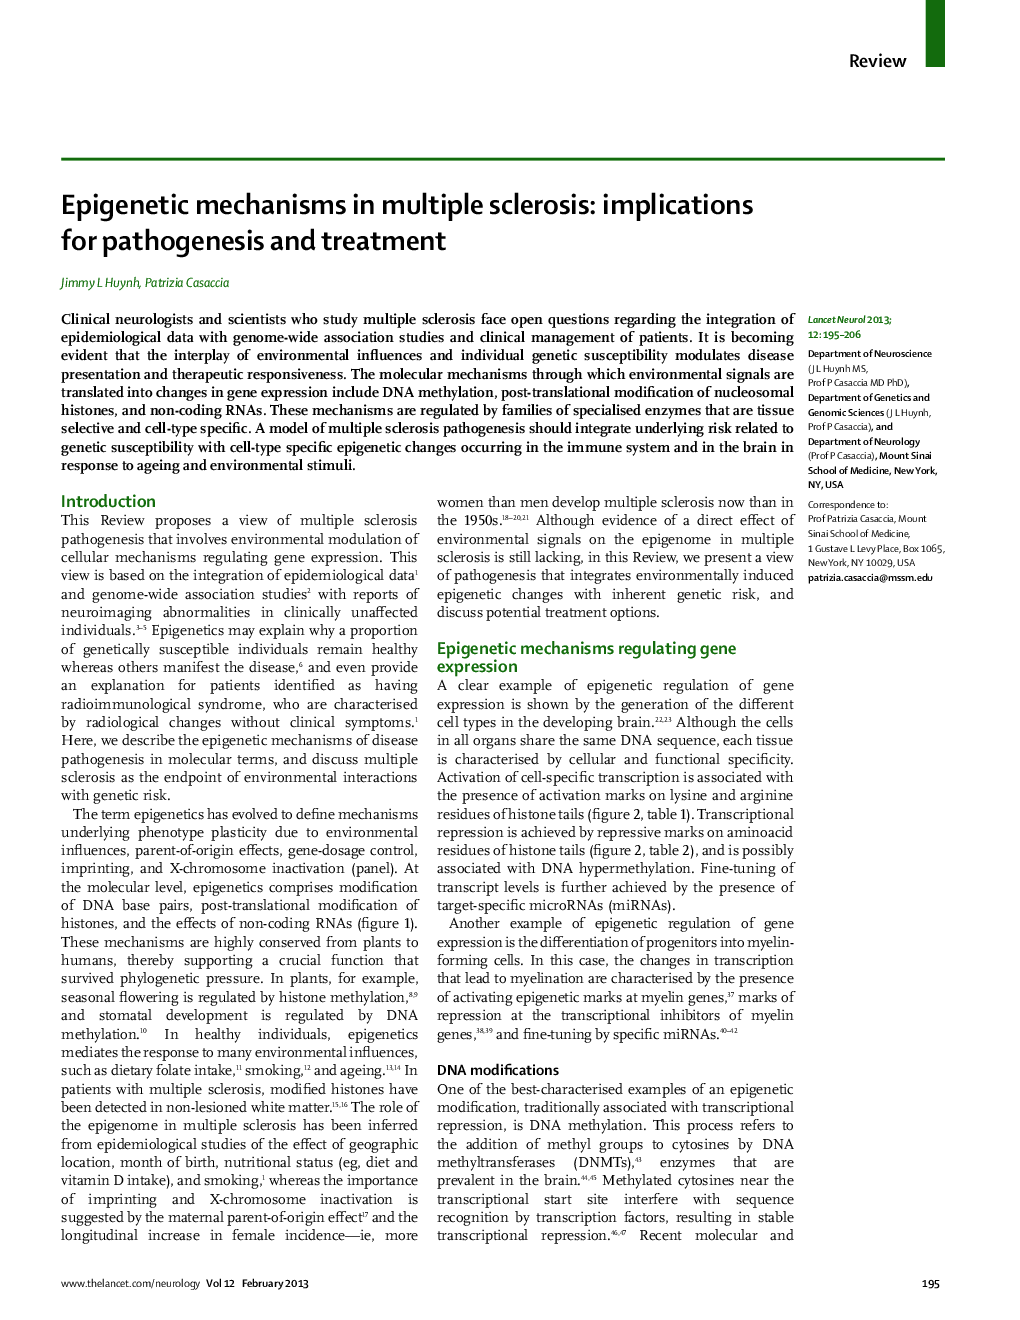 Epigenetic mechanisms in multiple sclerosis: implications for pathogenesis and treatment